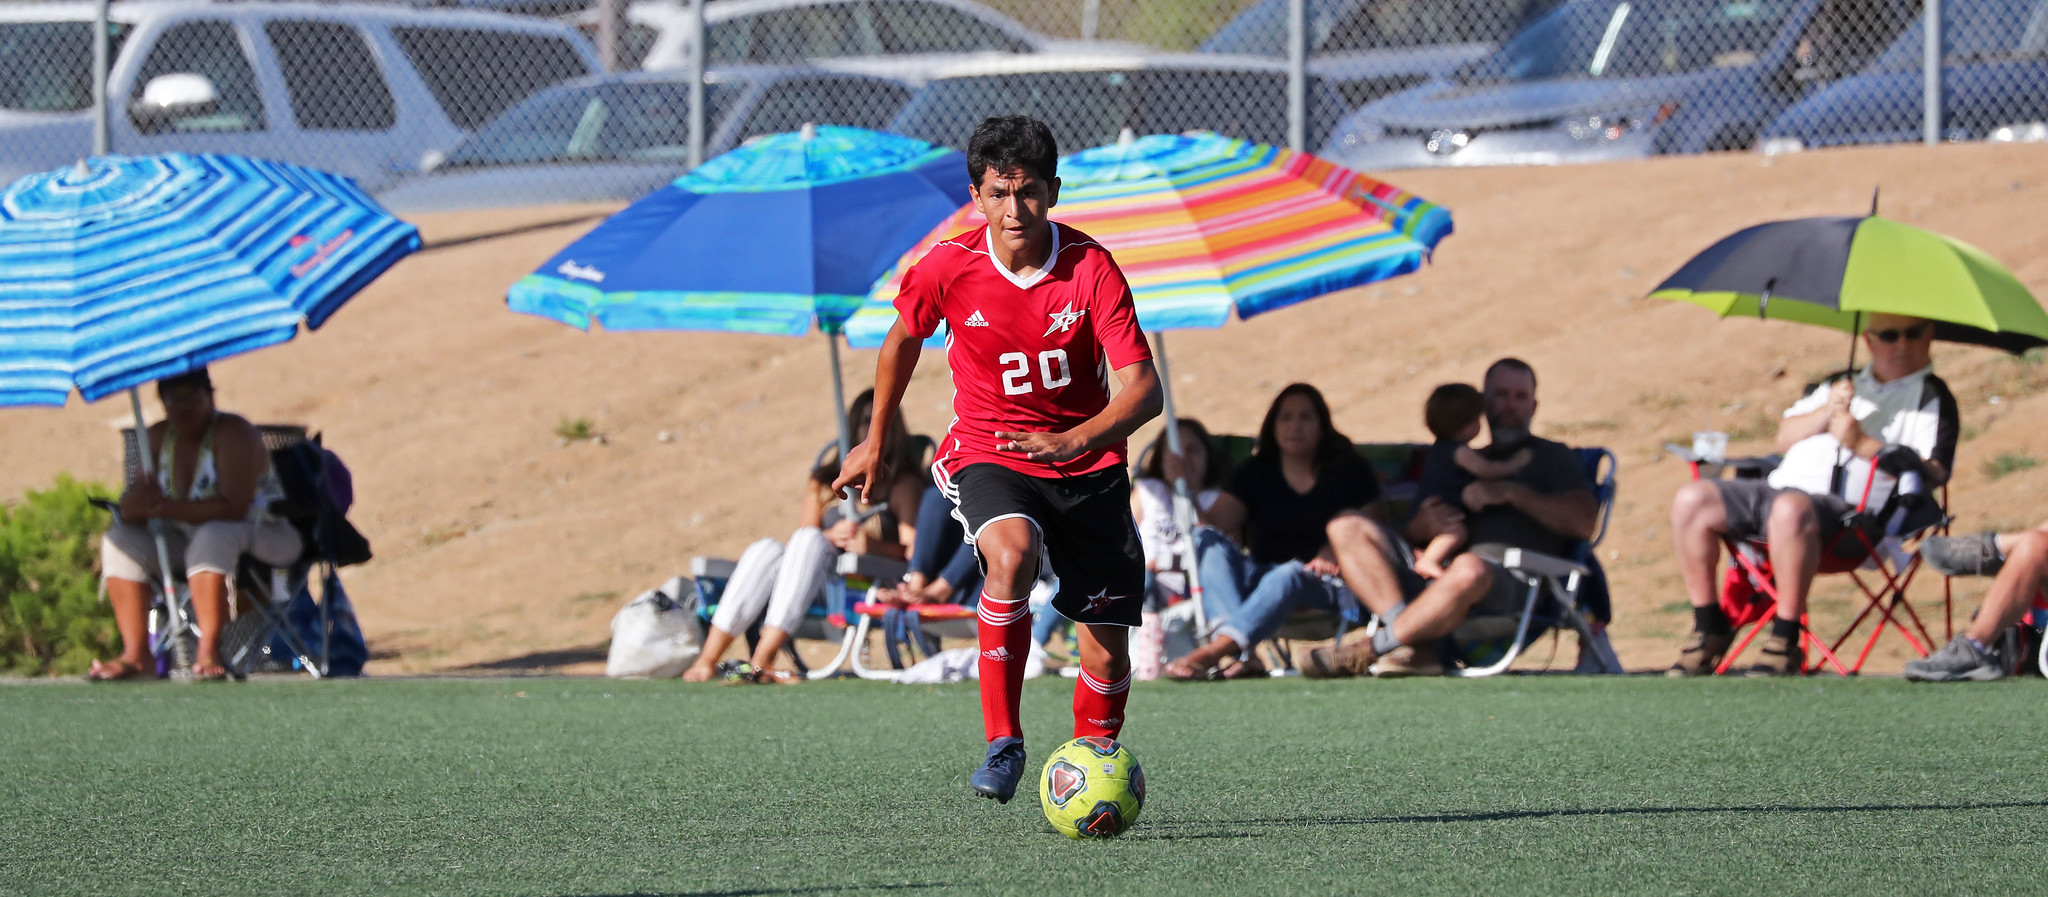 Christian Bahena assisted Arturo Soltero on the lone goal for the Comets. Photo by Hugh Cox (taken 8/27).